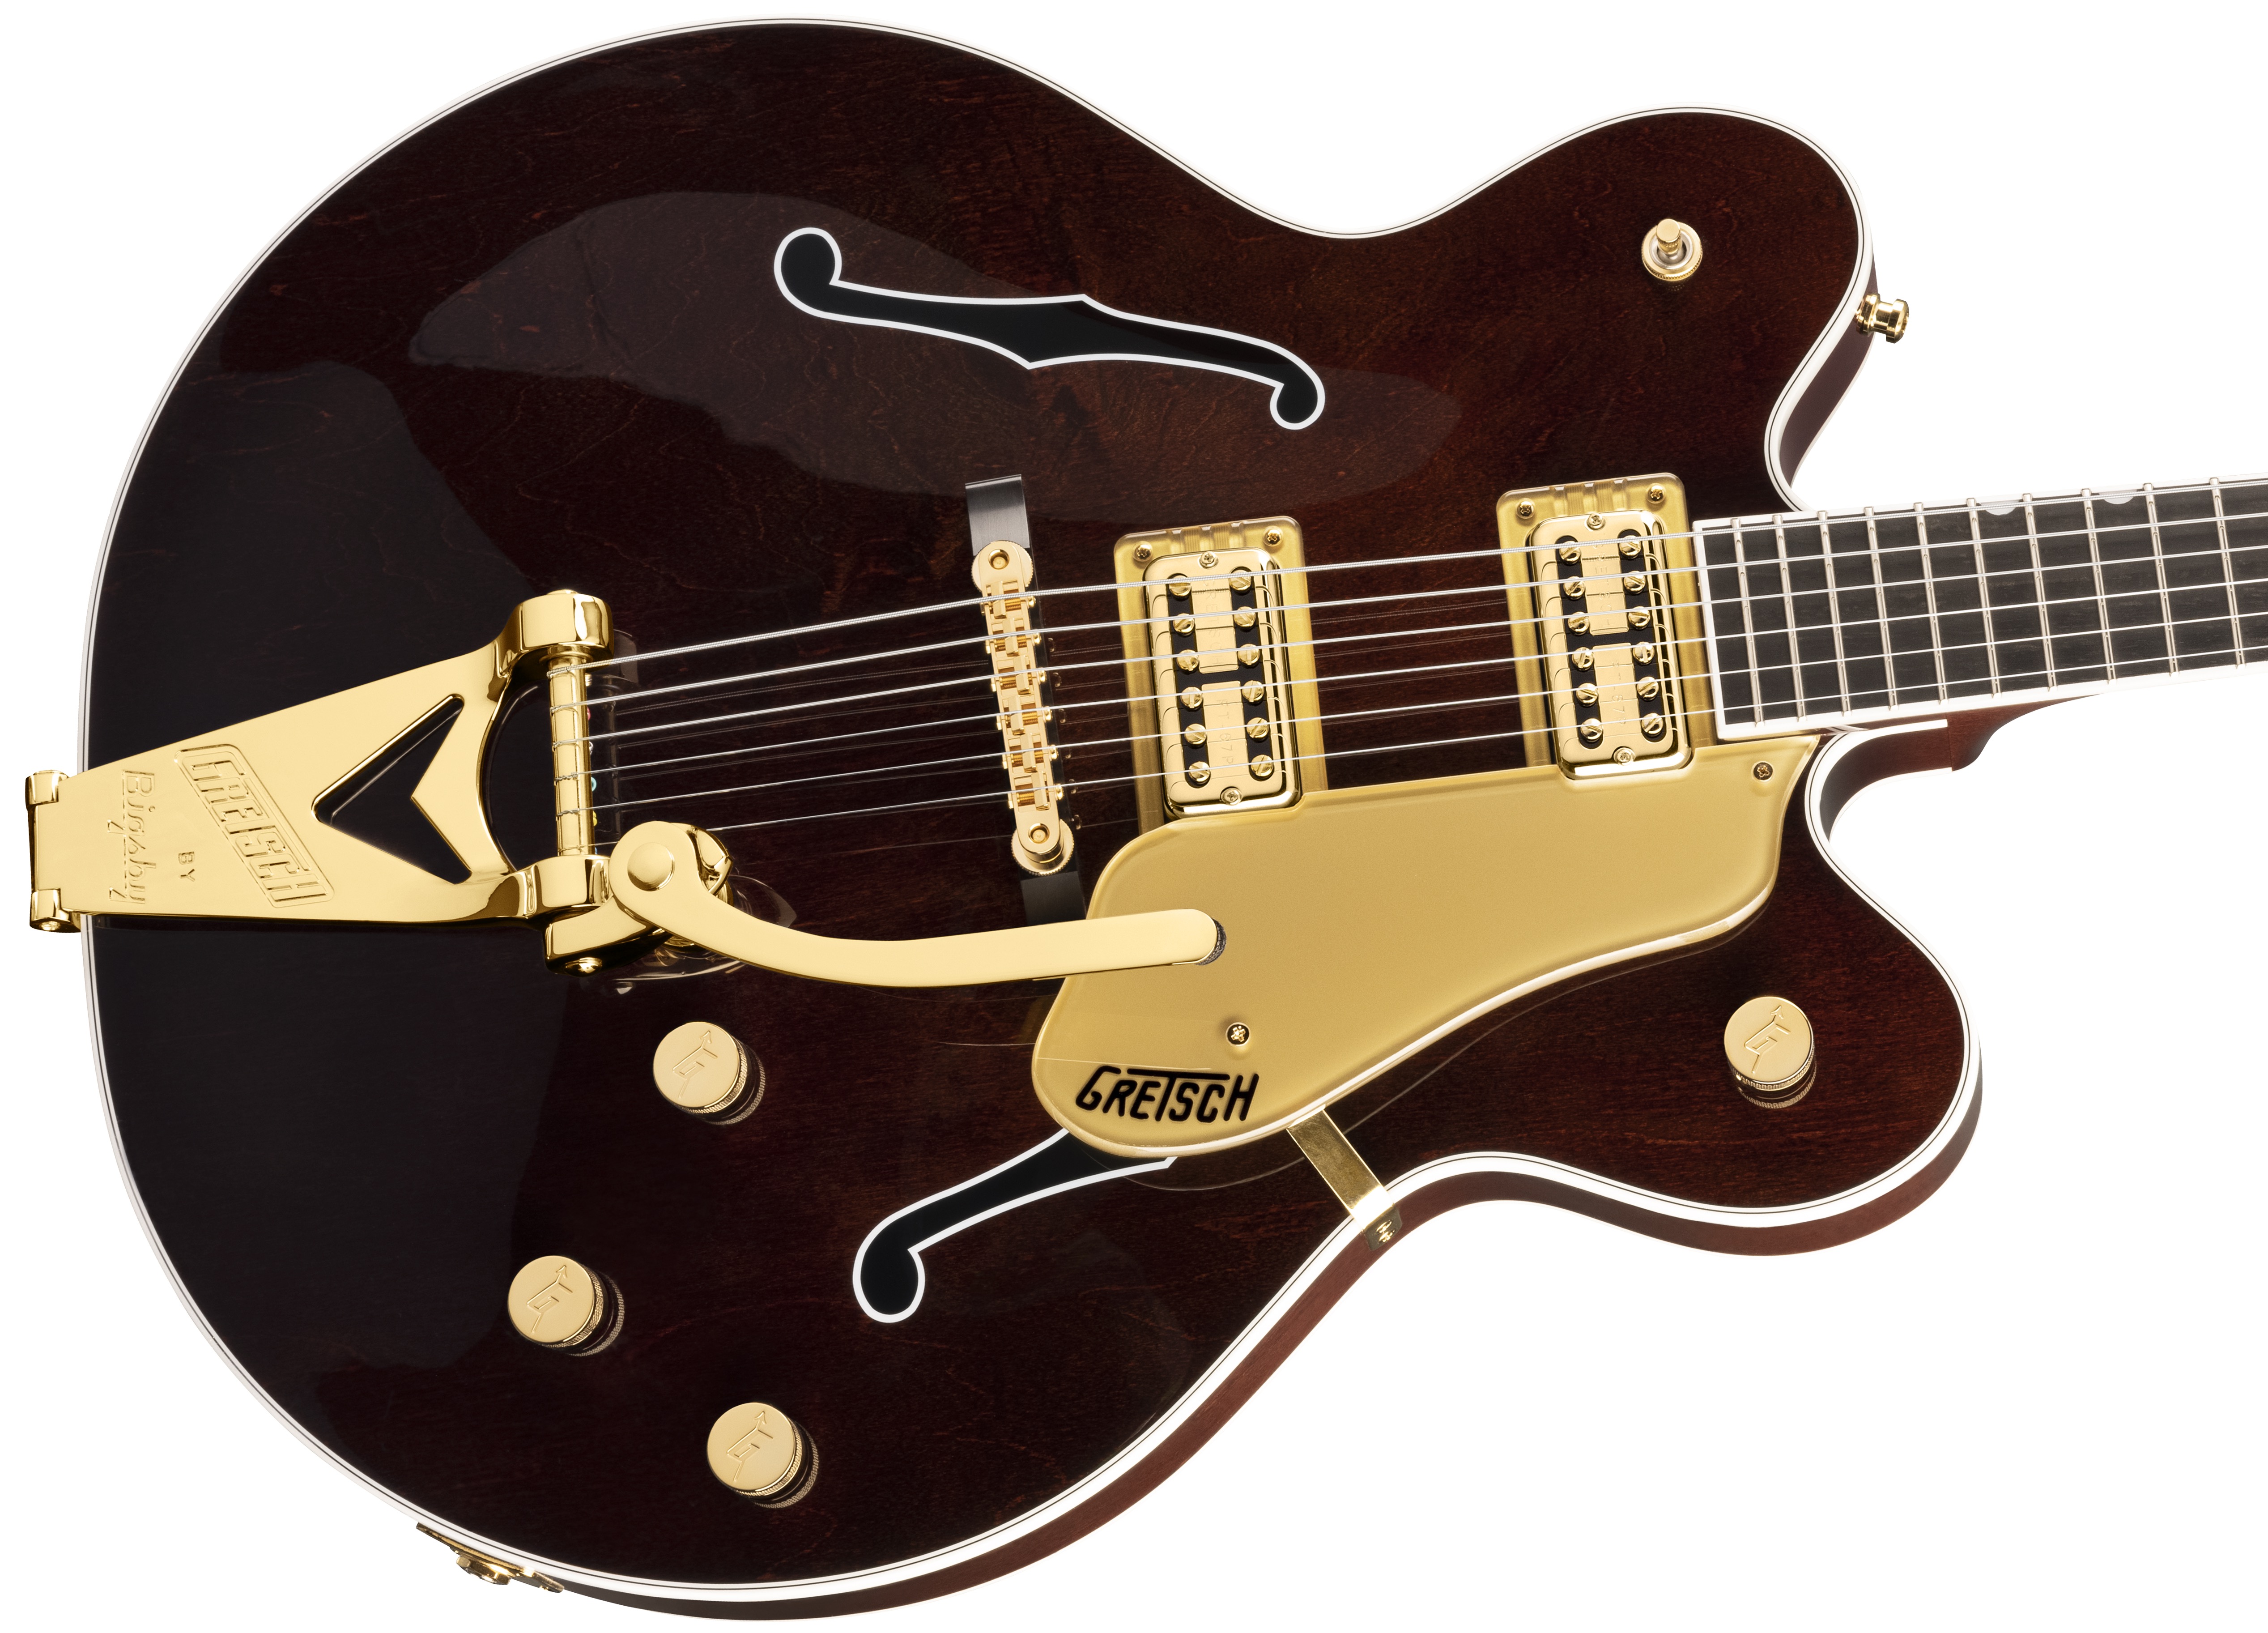 Country gentlemen. Gretsch Country Gentleman. Gretsch 6122 chet Atkins Country Gentleman. Gretsch Guitars g6119t-62 Vintage select Edition '62 Tennessee Rose ,FC. Гитары Oakland Country Gentleman.